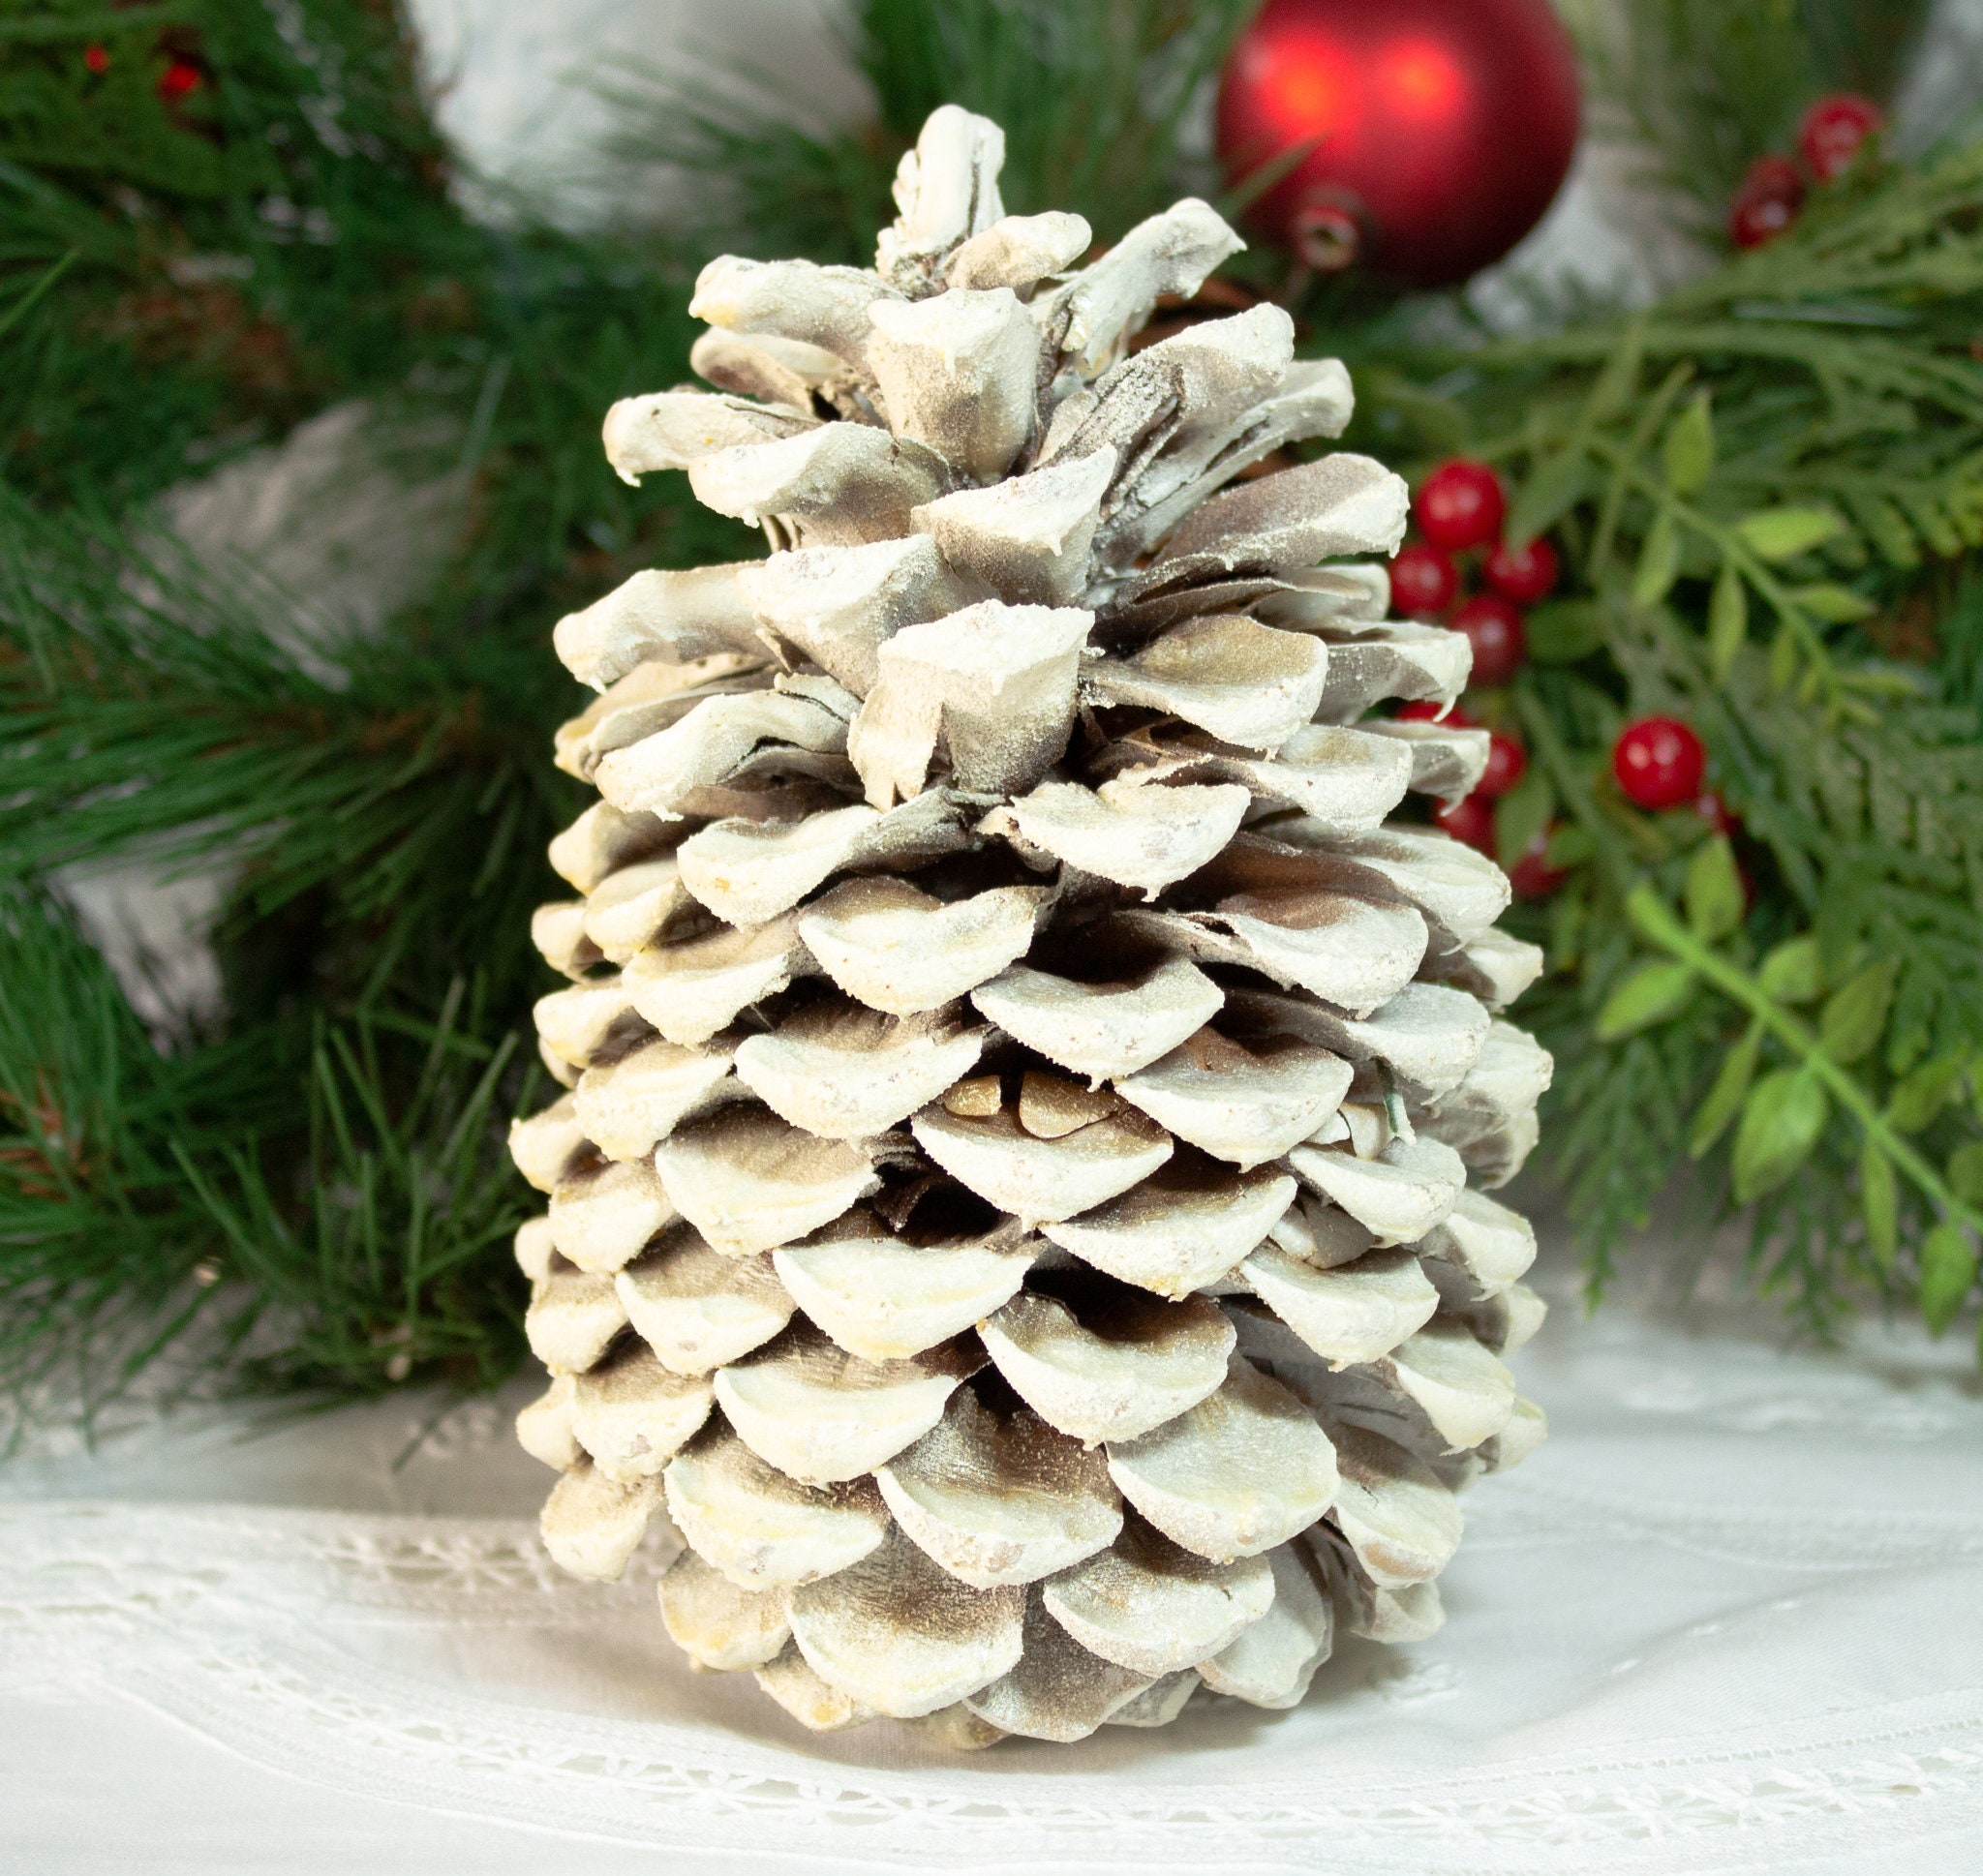  JOHOUSE 24PCS Natural White Pine Cones for Winter and Christmas  Decor : Home & Kitchen